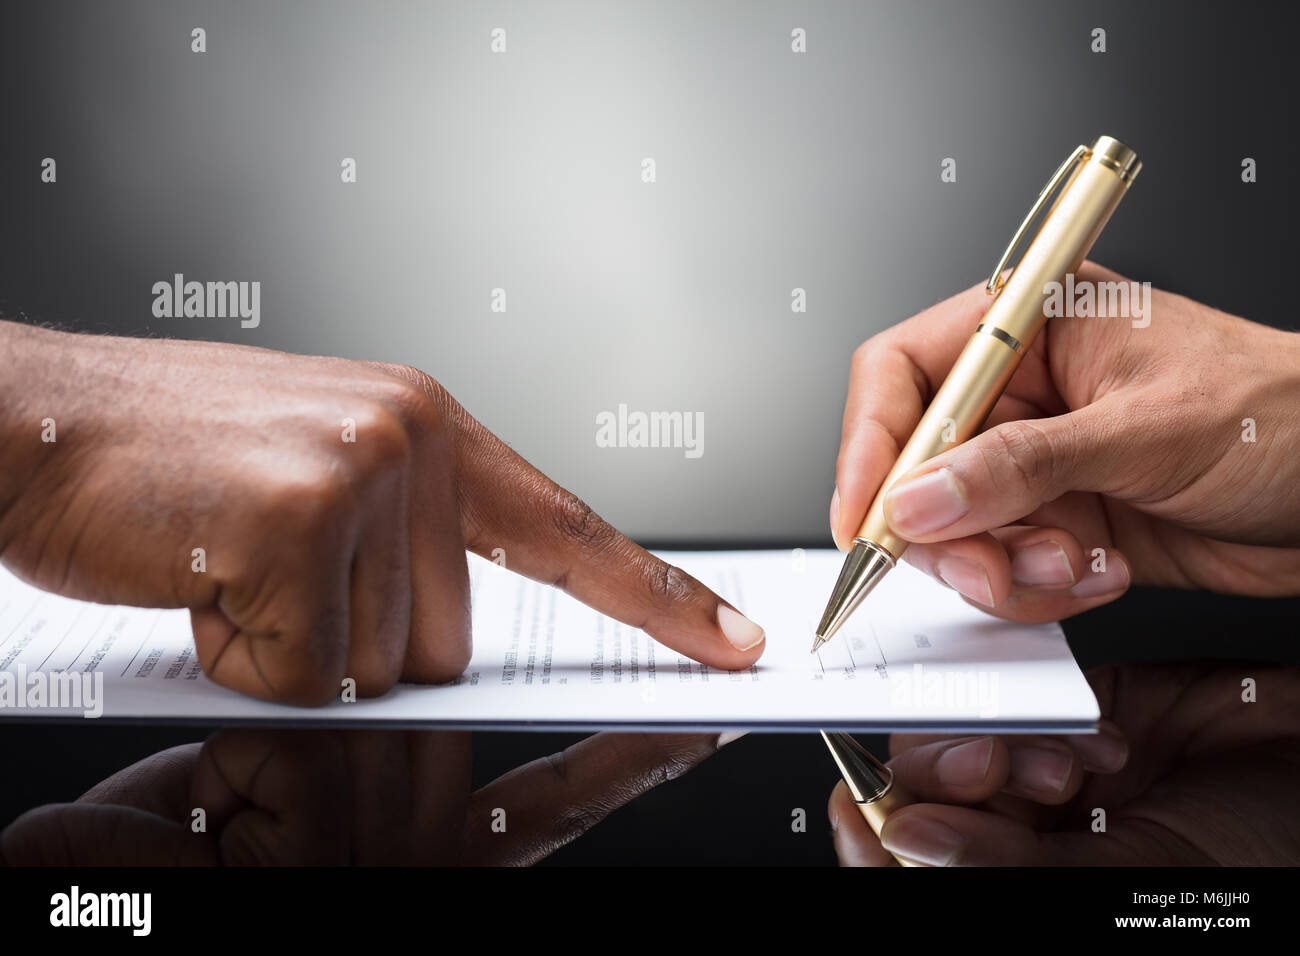 Pointing The Finger In Front Of A Person Signing With Golden Pen On The Document Stock Photo